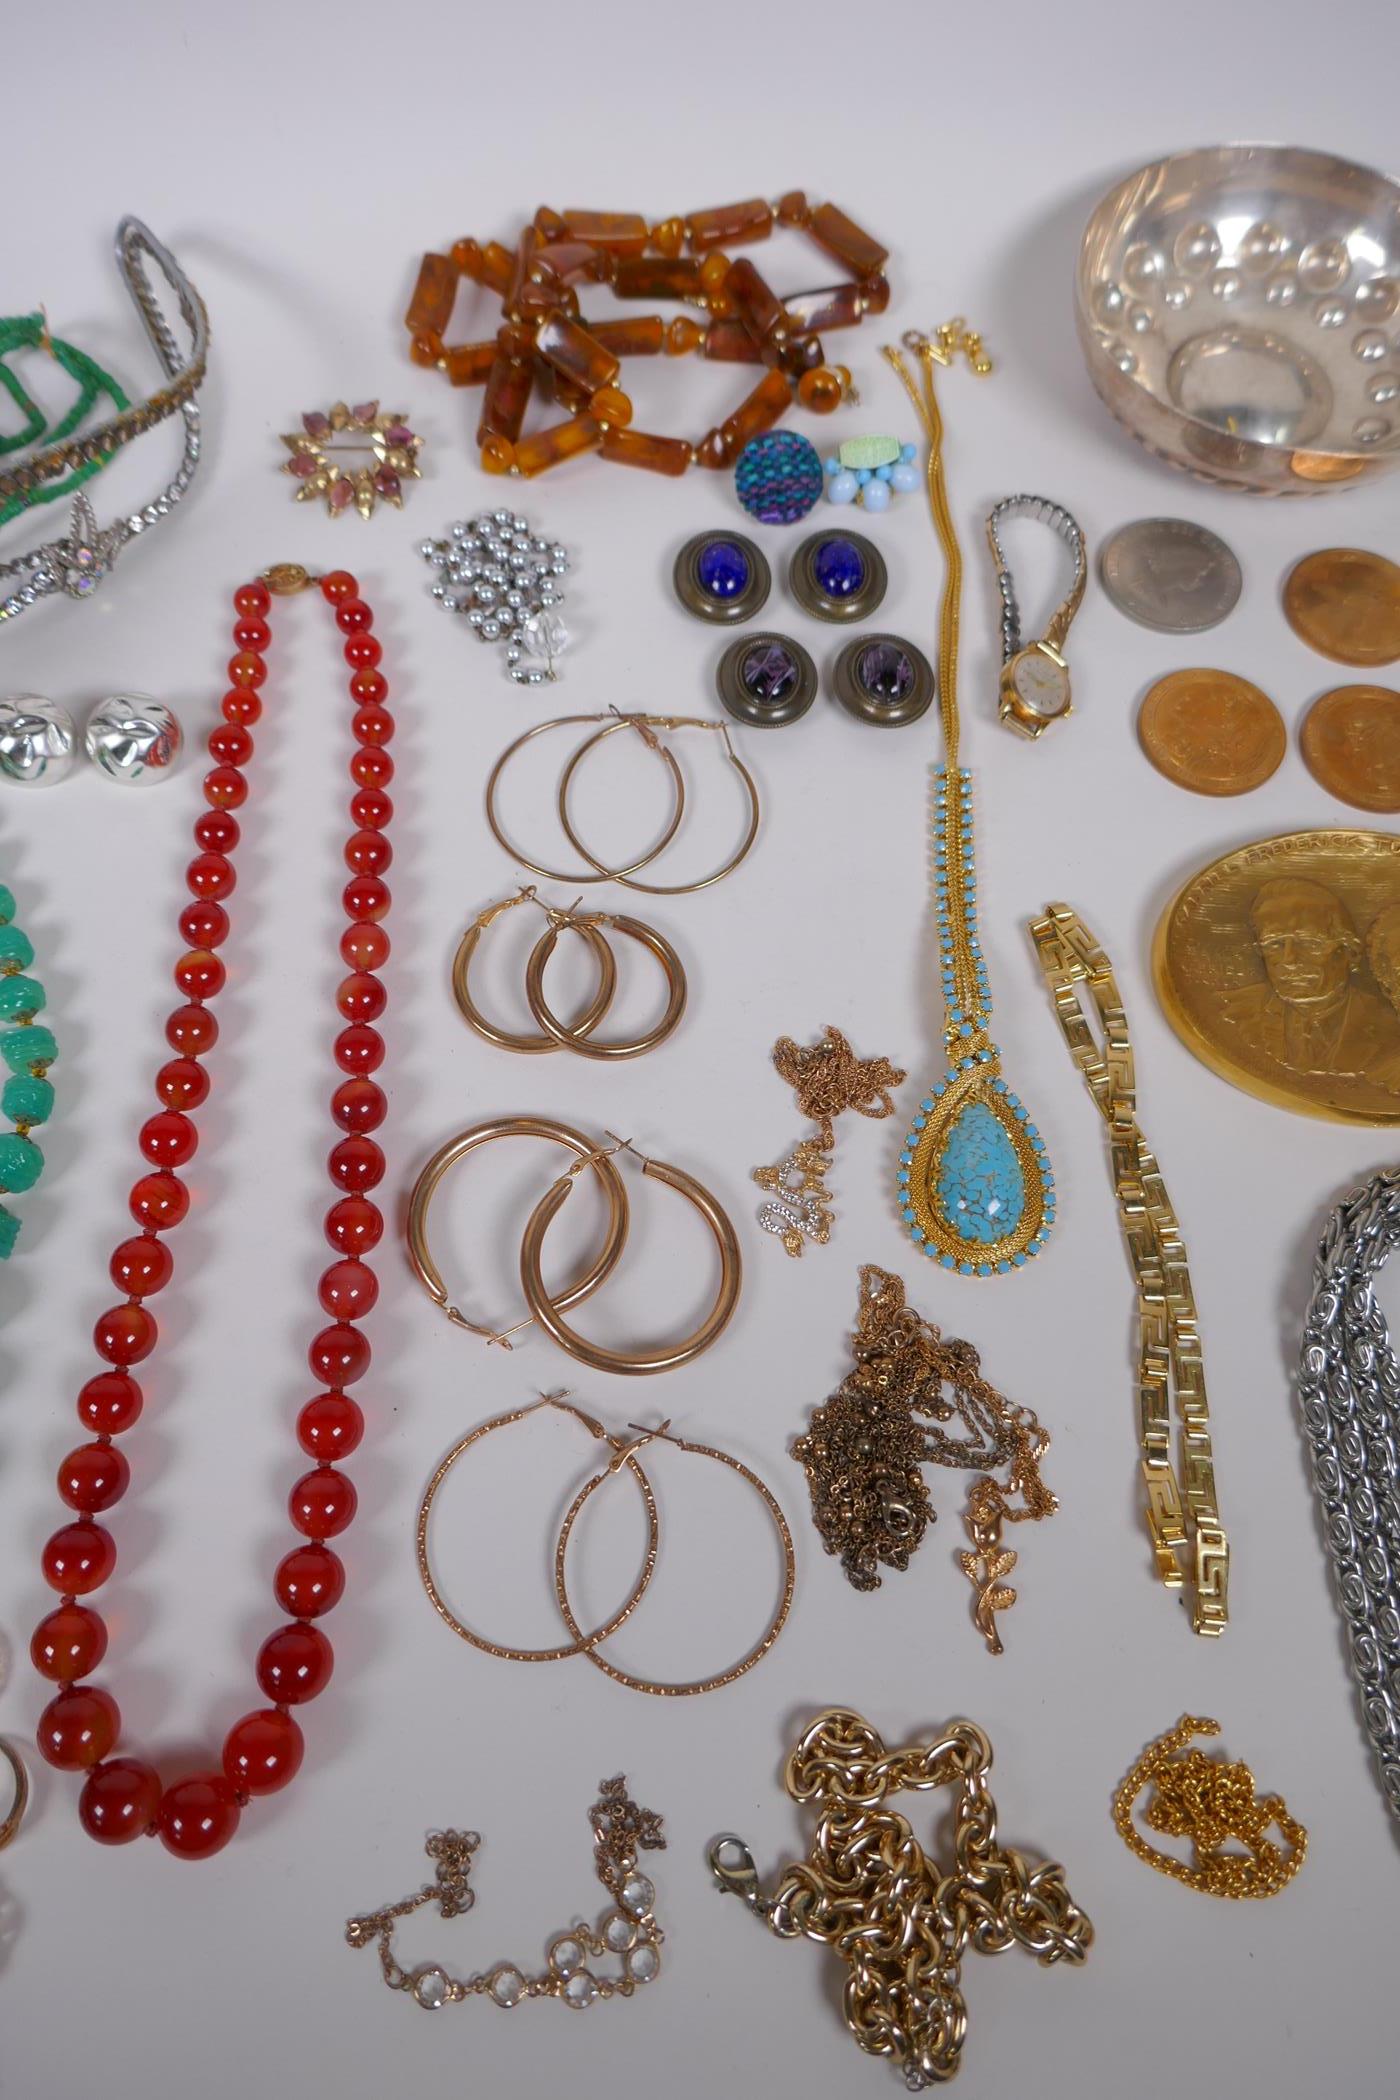 A quantity of vintage costume jewellery including a tiara, bangles, necklaces etc, together with a - Image 5 of 9